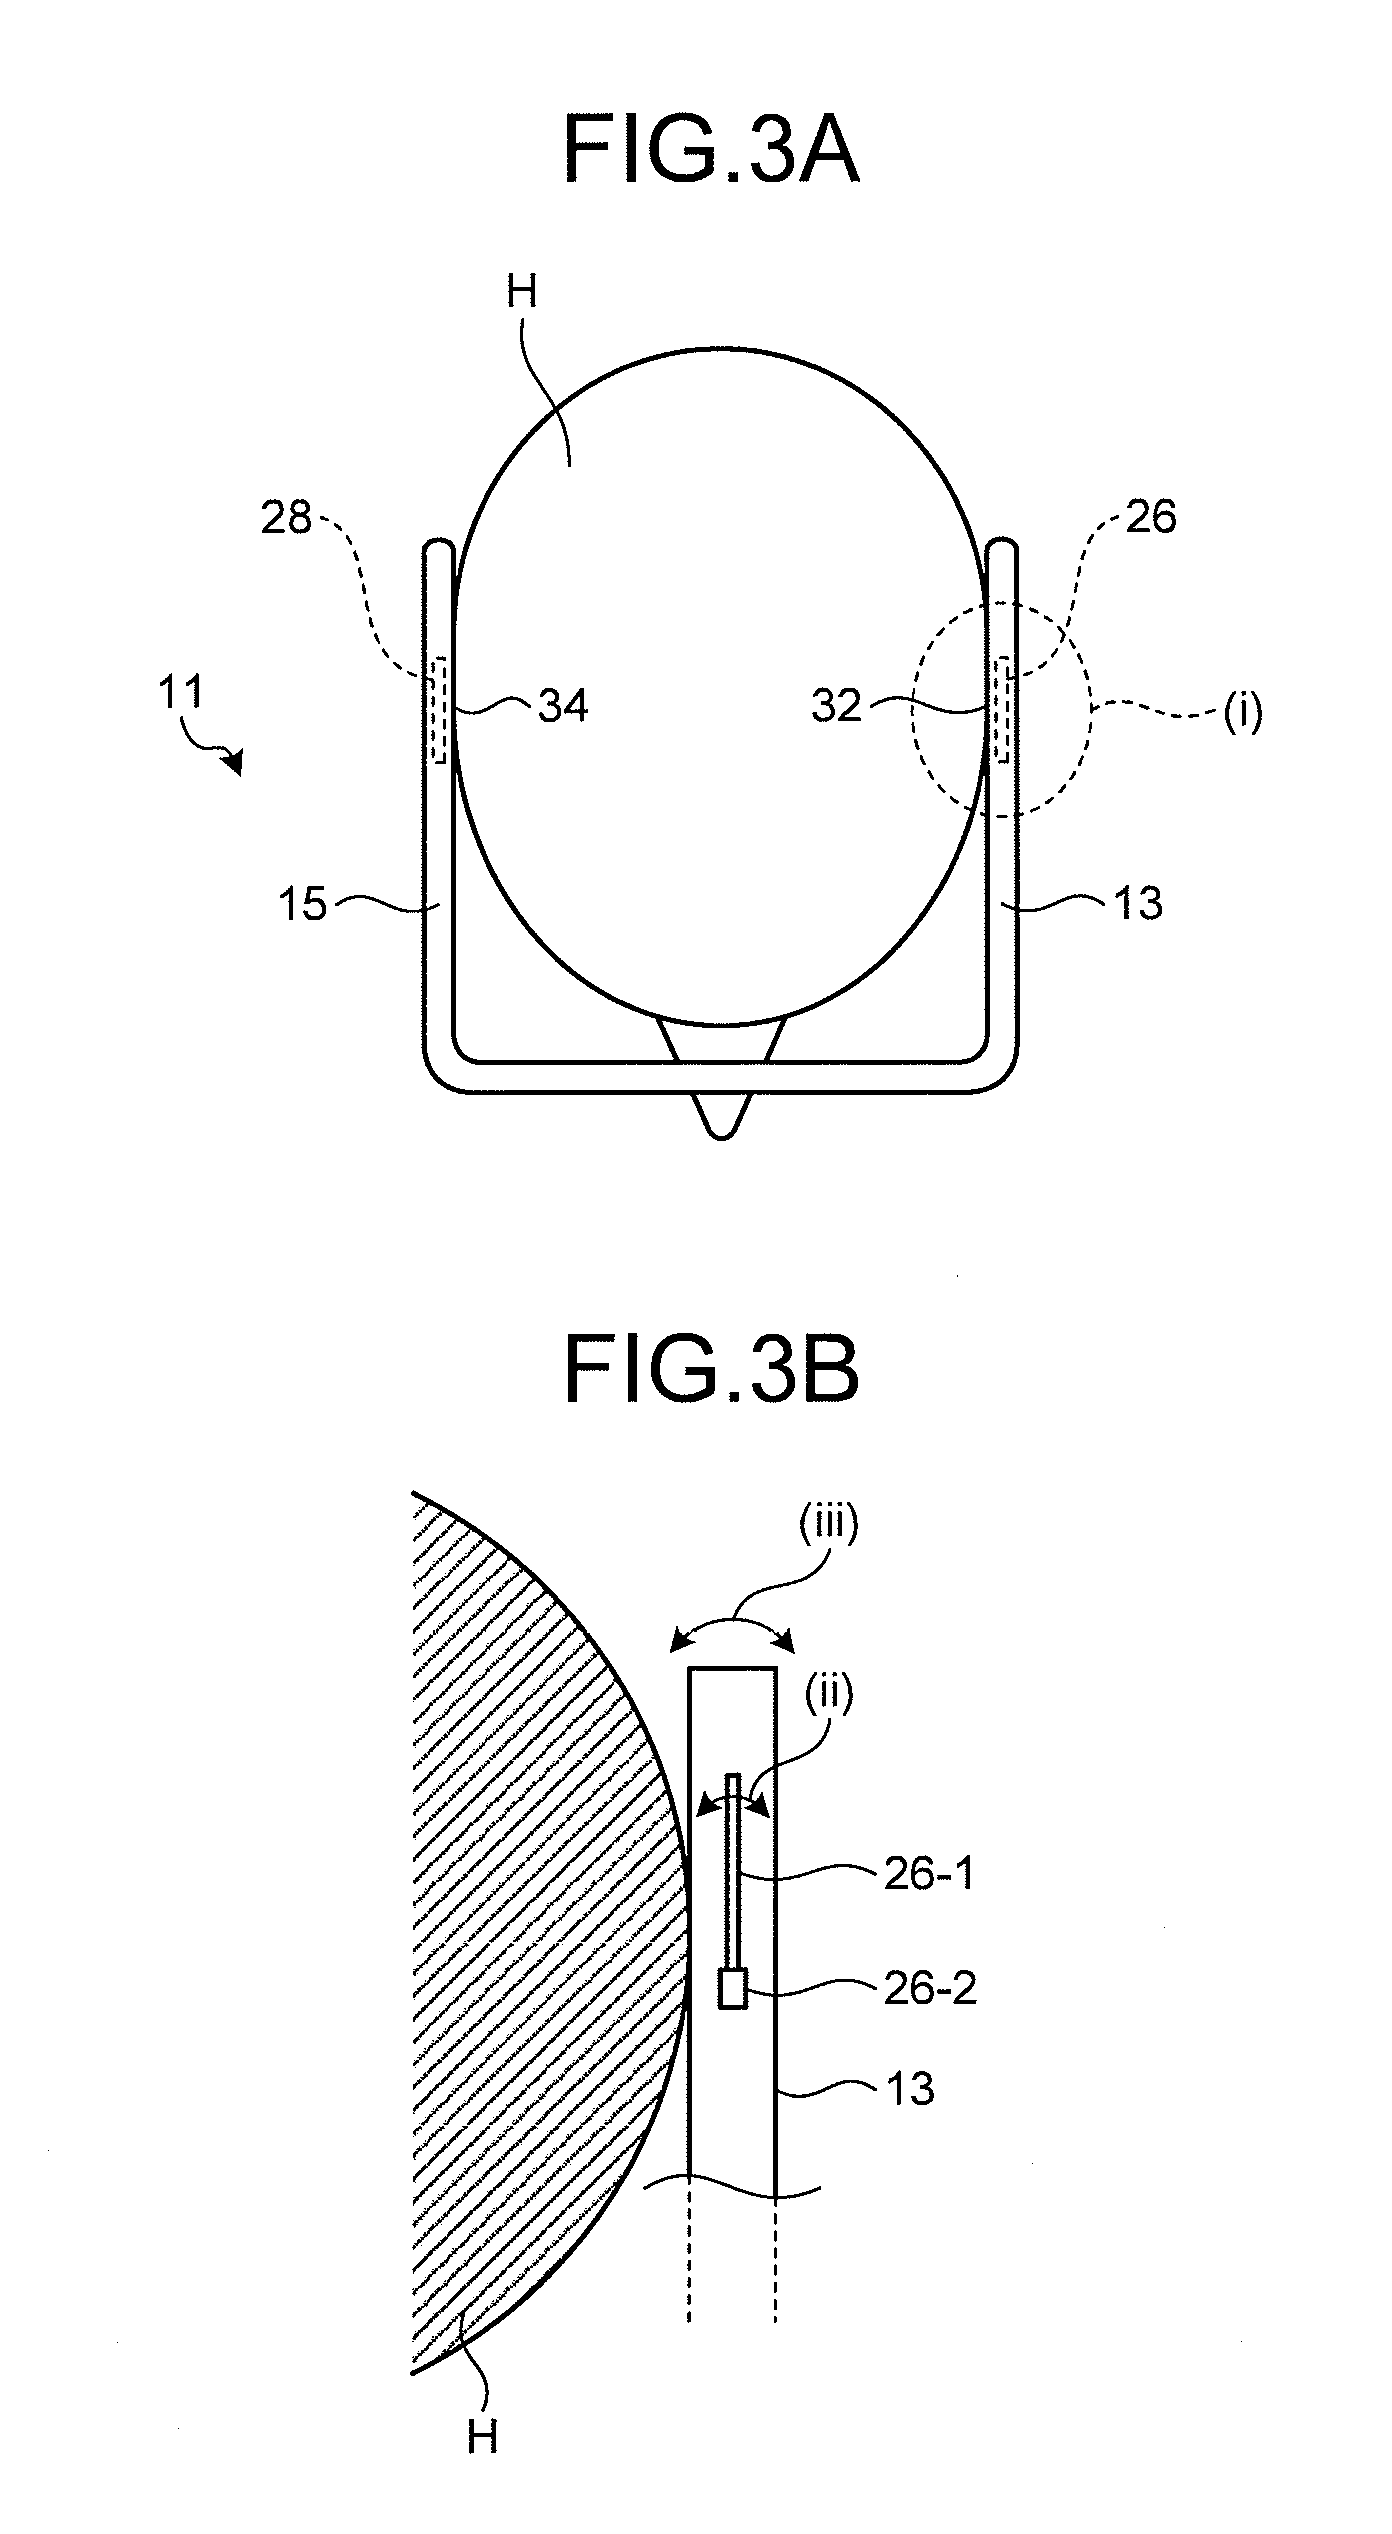 Sound outputting device